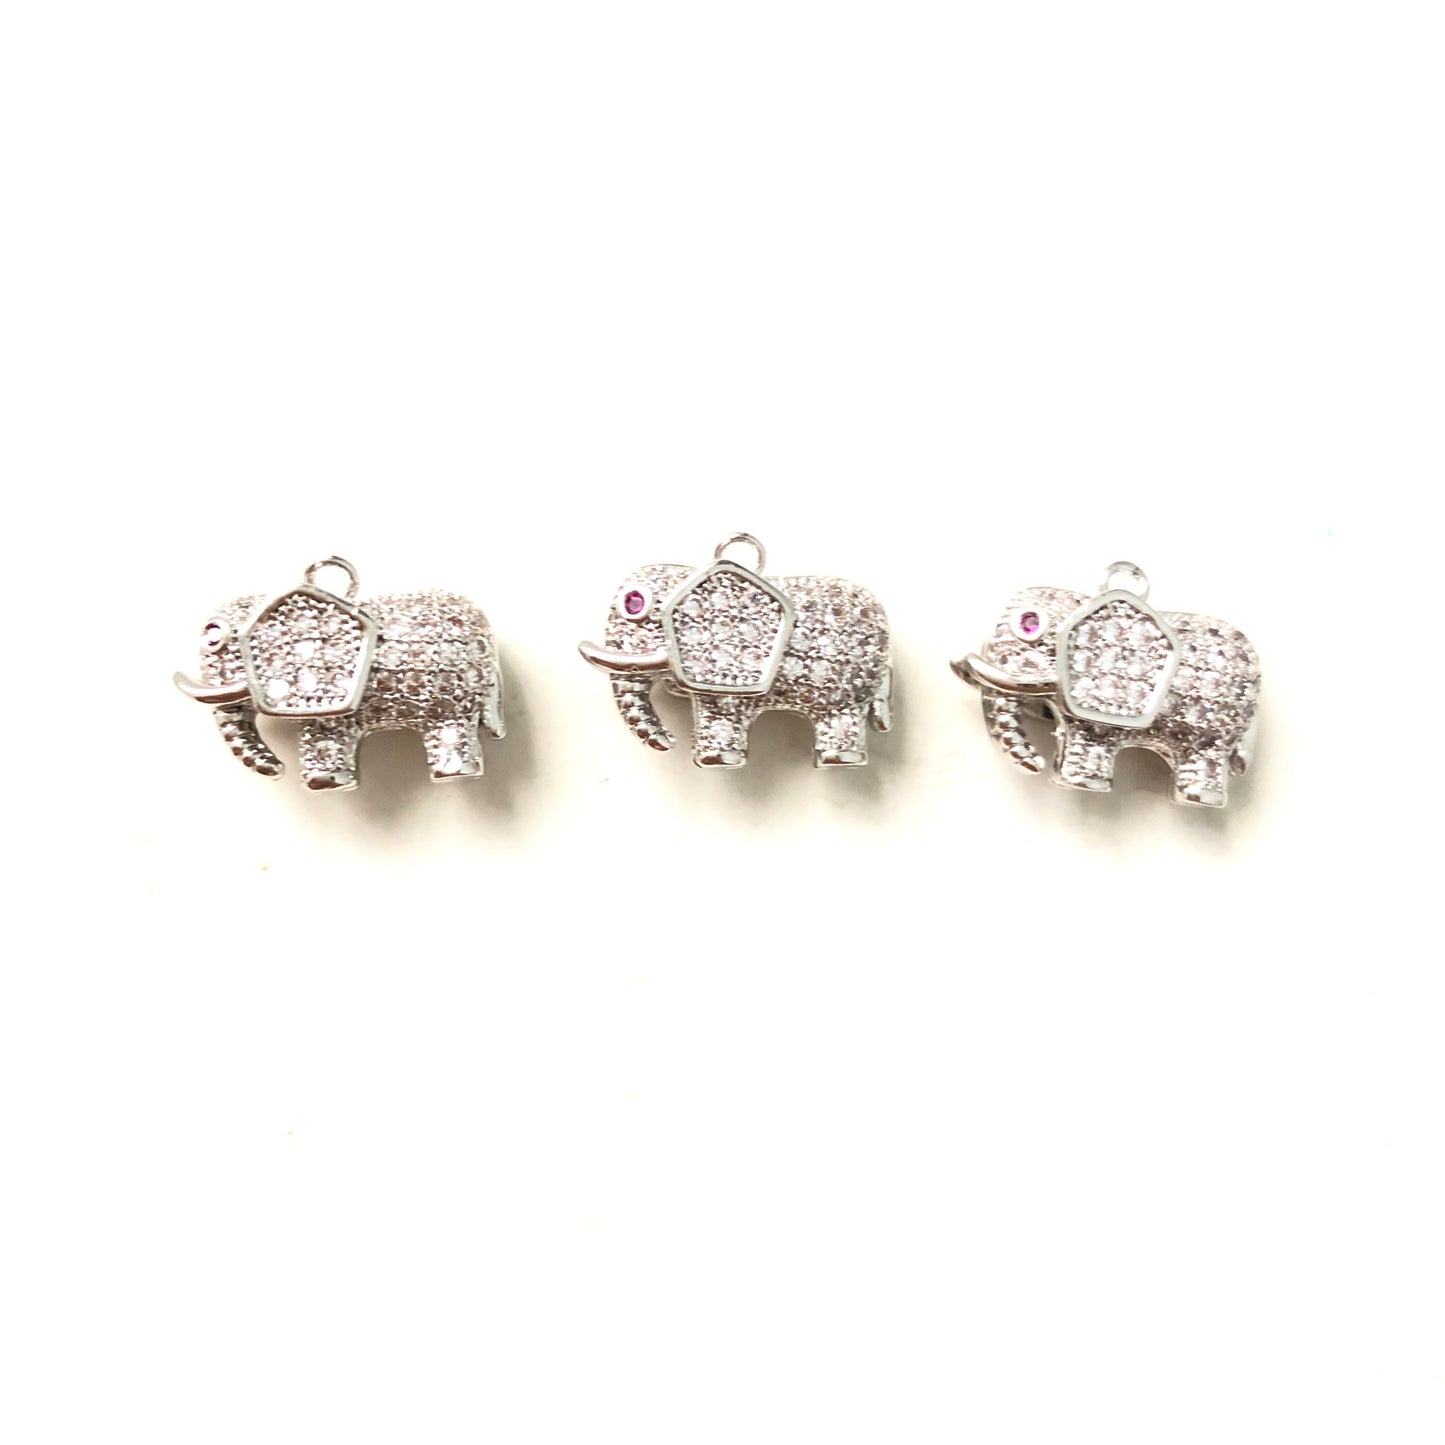 10pcs/lot 15*9mm CZ Paved Elephant Charms Silver CZ Paved Charms Animals & Insects Small Sizes Charms Beads Beyond